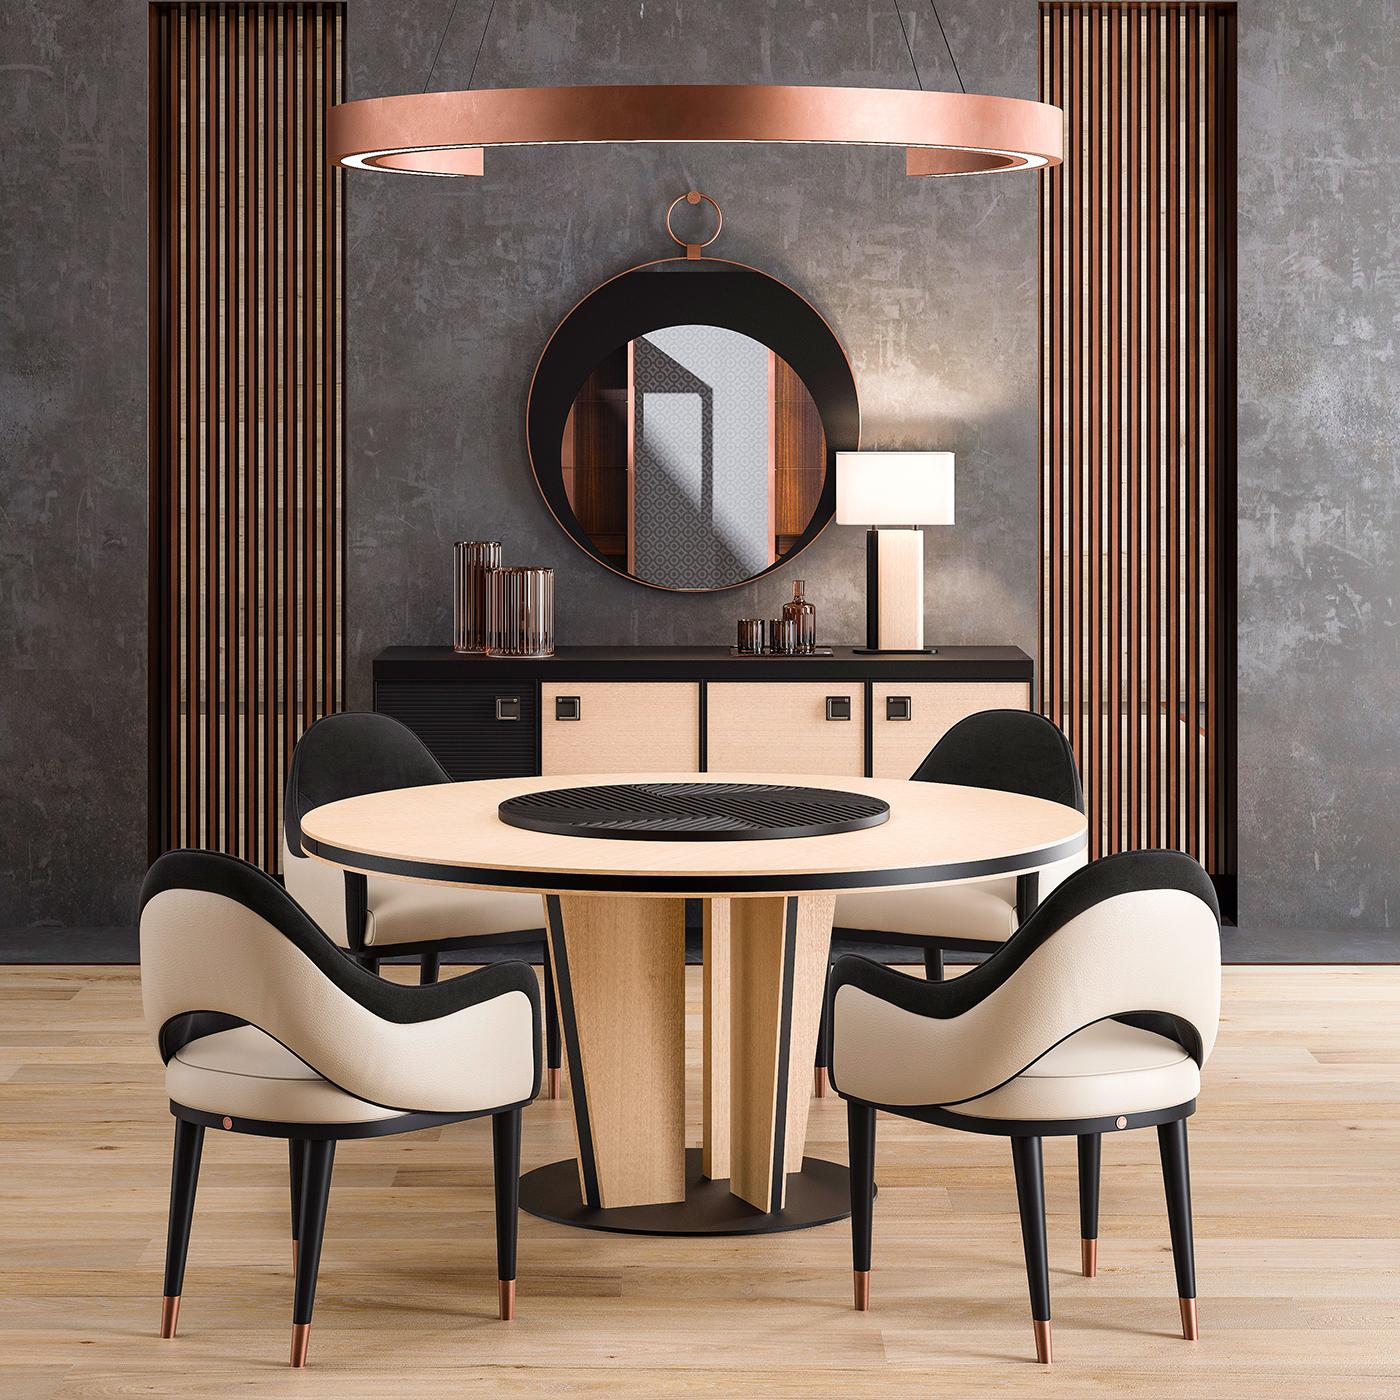 Marked by a two-tone design, this stunning round table is crafted on beige eucalyptus veneer with black-lacquered inserts. The base sits on a round black-finished metal plate and is made up of four legs set closer to the center to form a pillar-like